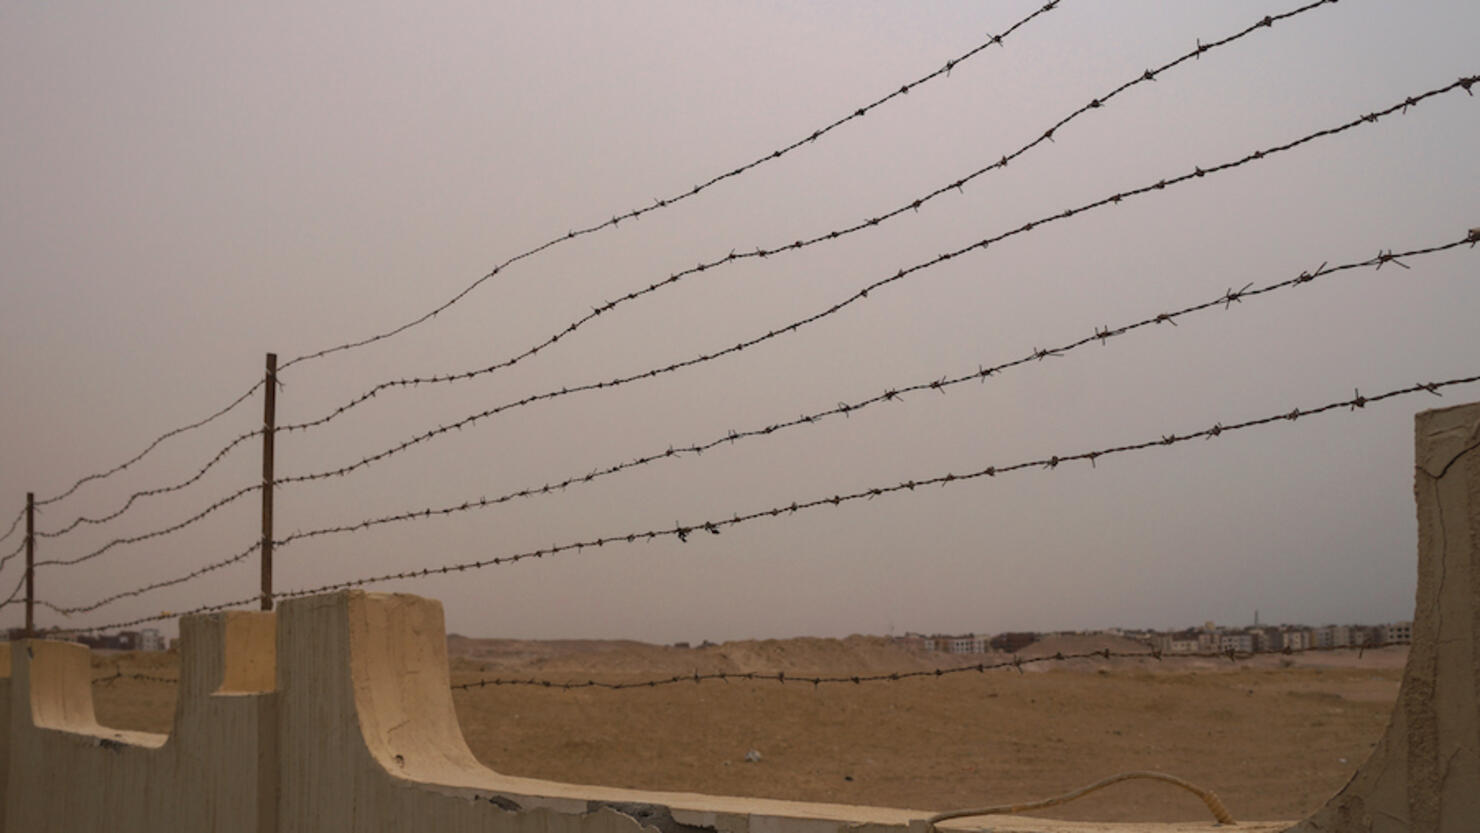 Restrictive fence with barbed wire. Tour area conc camp. Genocide during the war. Stock photo